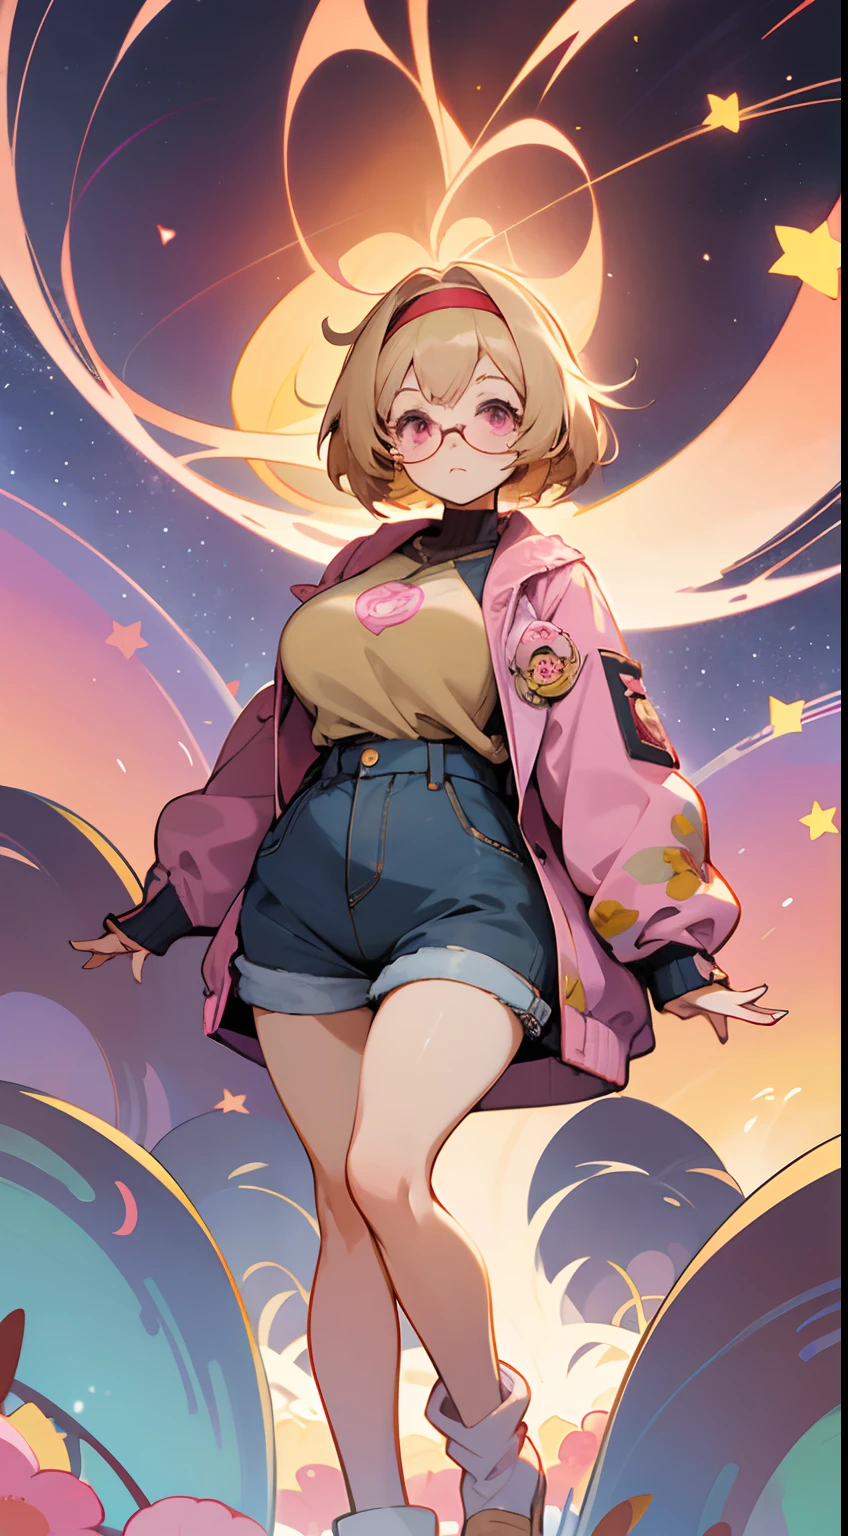 anime girl with big round glasses , anime moe anime girl, pink eyes, short brown mesdy hair, blonde bangs, wearing jean shorts, tan sweater, and big pink jacket with flower designs, cute hair accessories, ((full body)), cute art style, busty, big breasts, chubby, pear body shape, wide hips, big thighs, white headband, tired expression, standing in a flower field with chibi cartoon bees, beautiful sunset, stars, beautiful lighting, fantasy world, music notes in background.